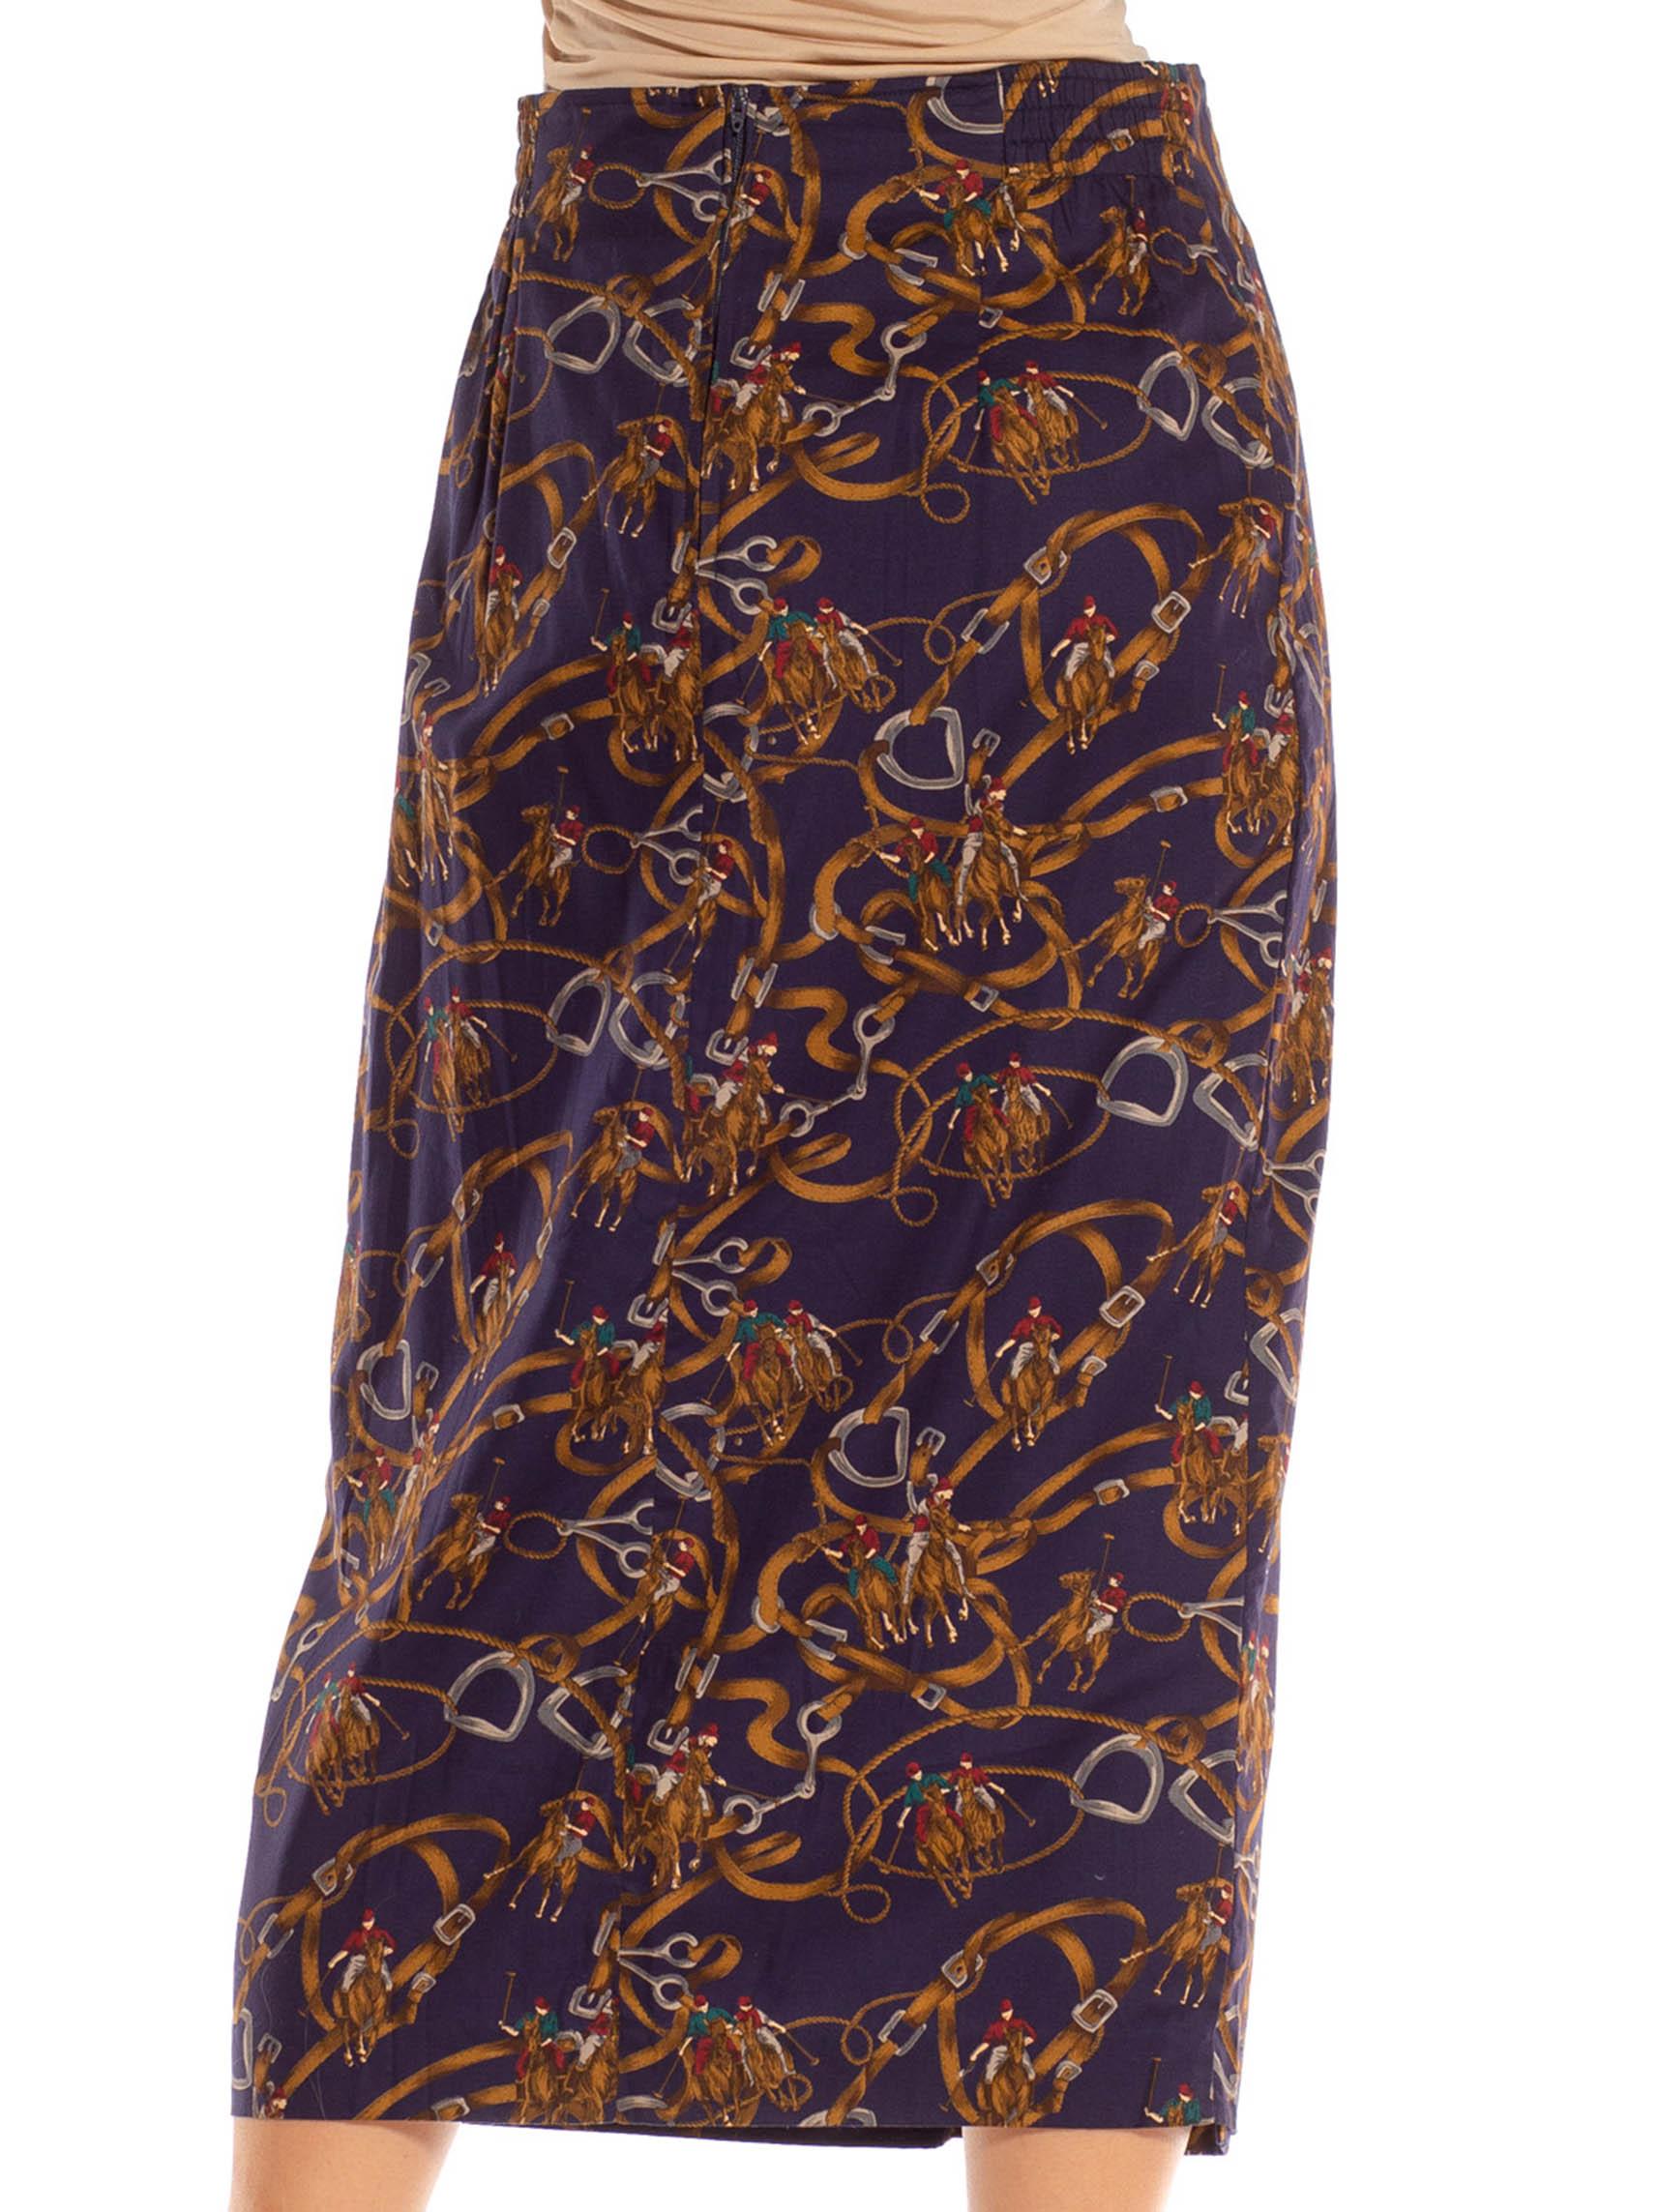 1990S Navy & Brown Cotton Blend Equestrian Print Skirt For Sale 2